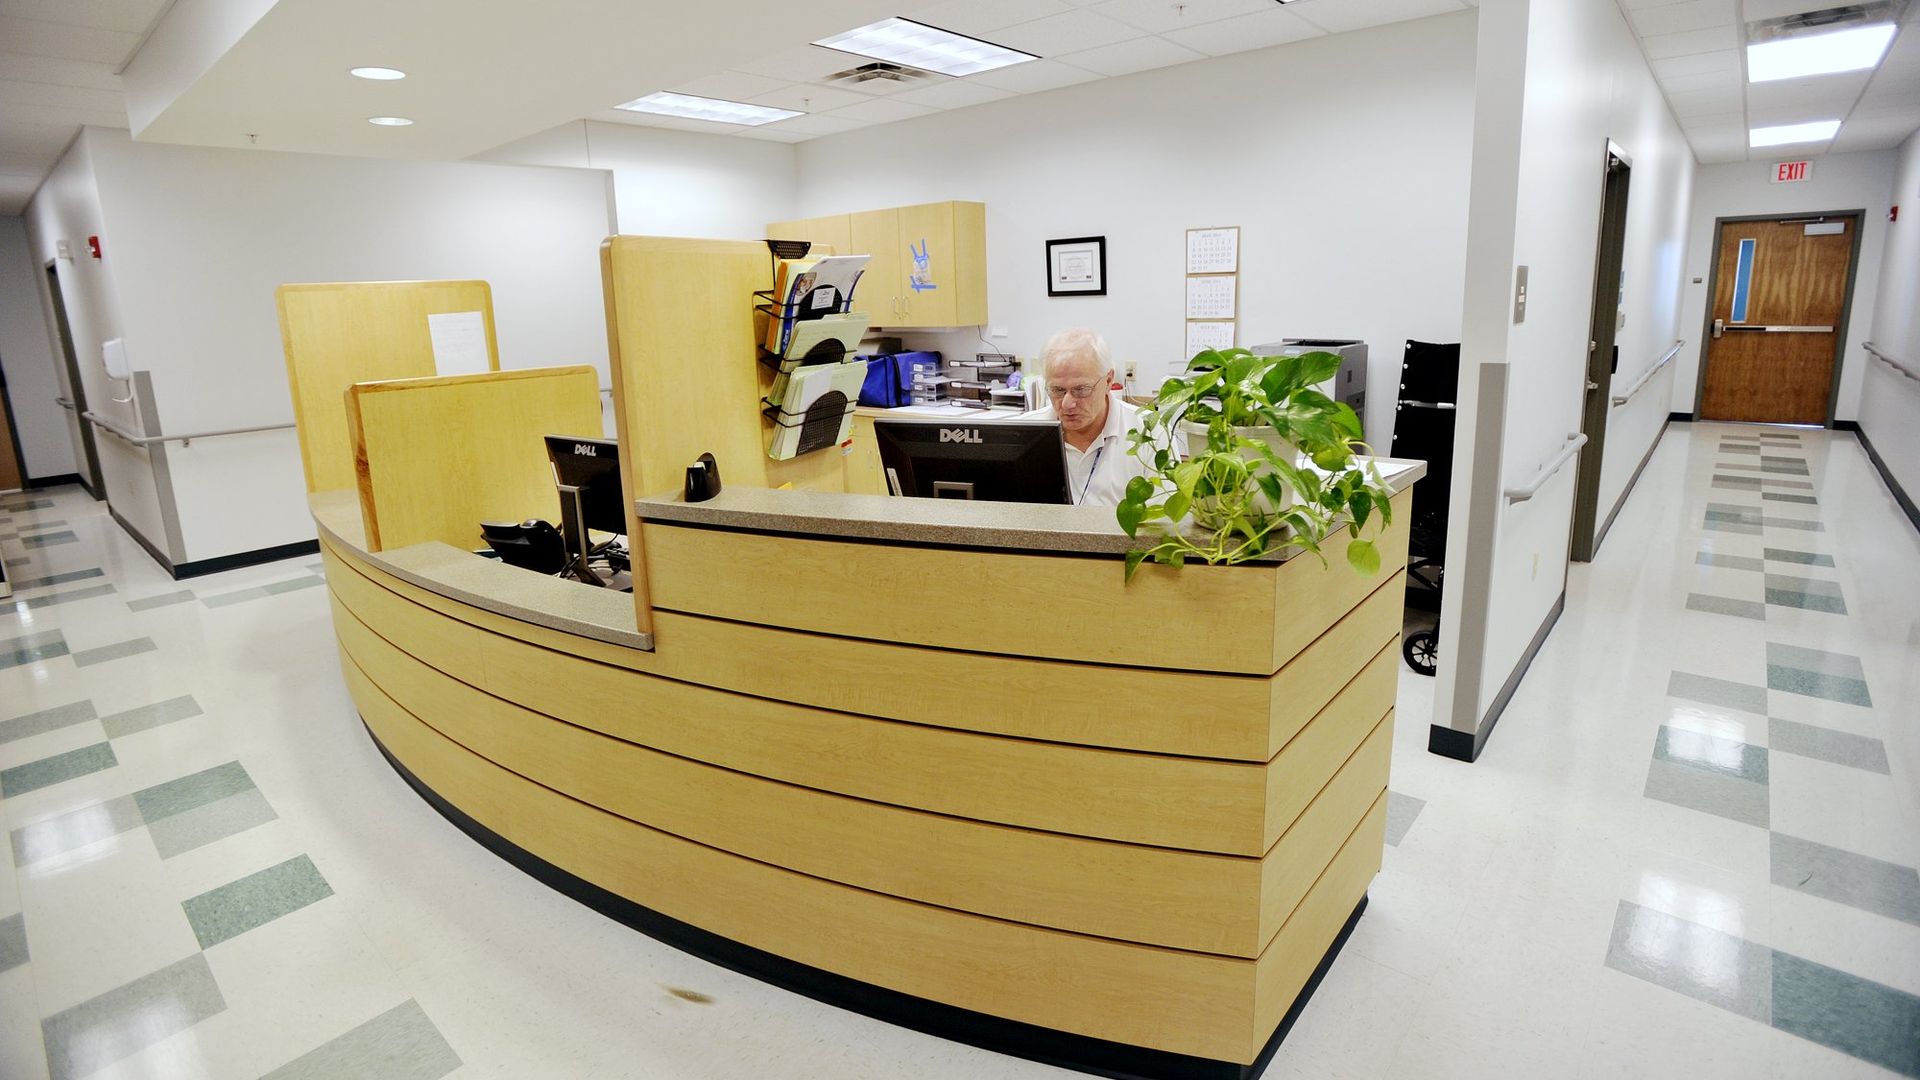 The Veterans Administration opened its first primary care and mental health clinic in Portland in 2011.